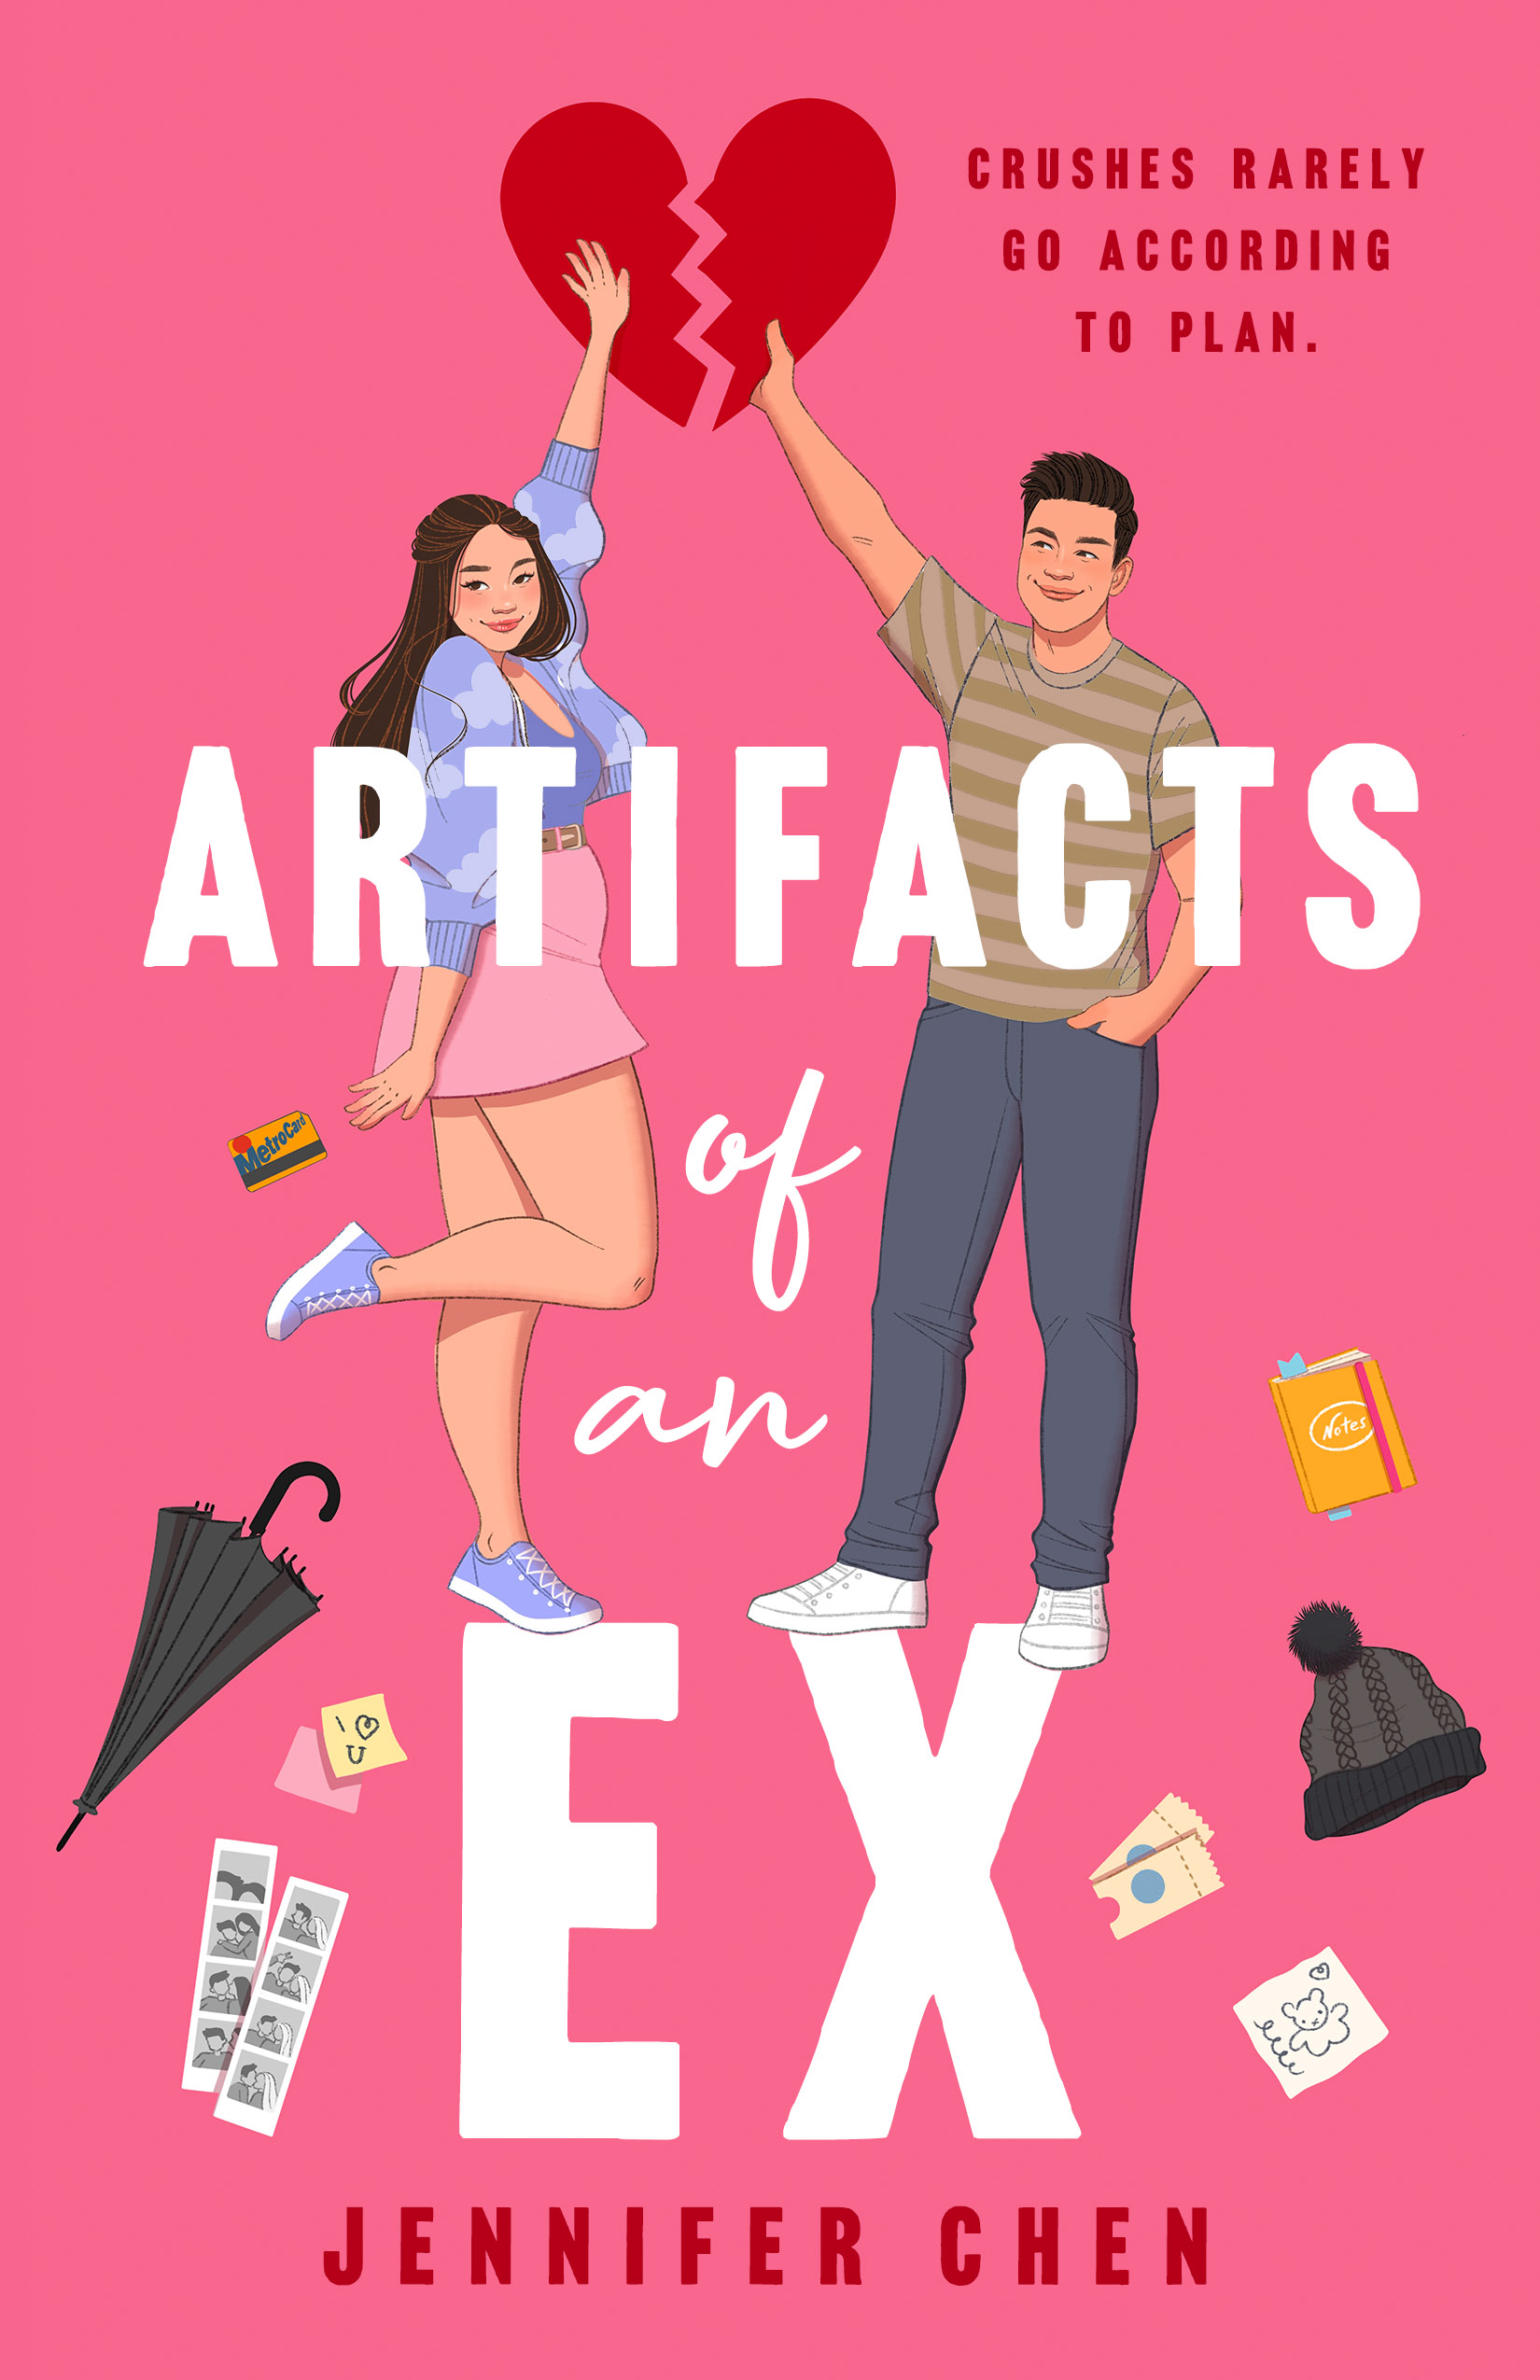 Pink cover for ARTIFACTS OF AN EX with Asian American teens and objects from the girls's breakup, like a knit hat, umbrella, and a Metrocard